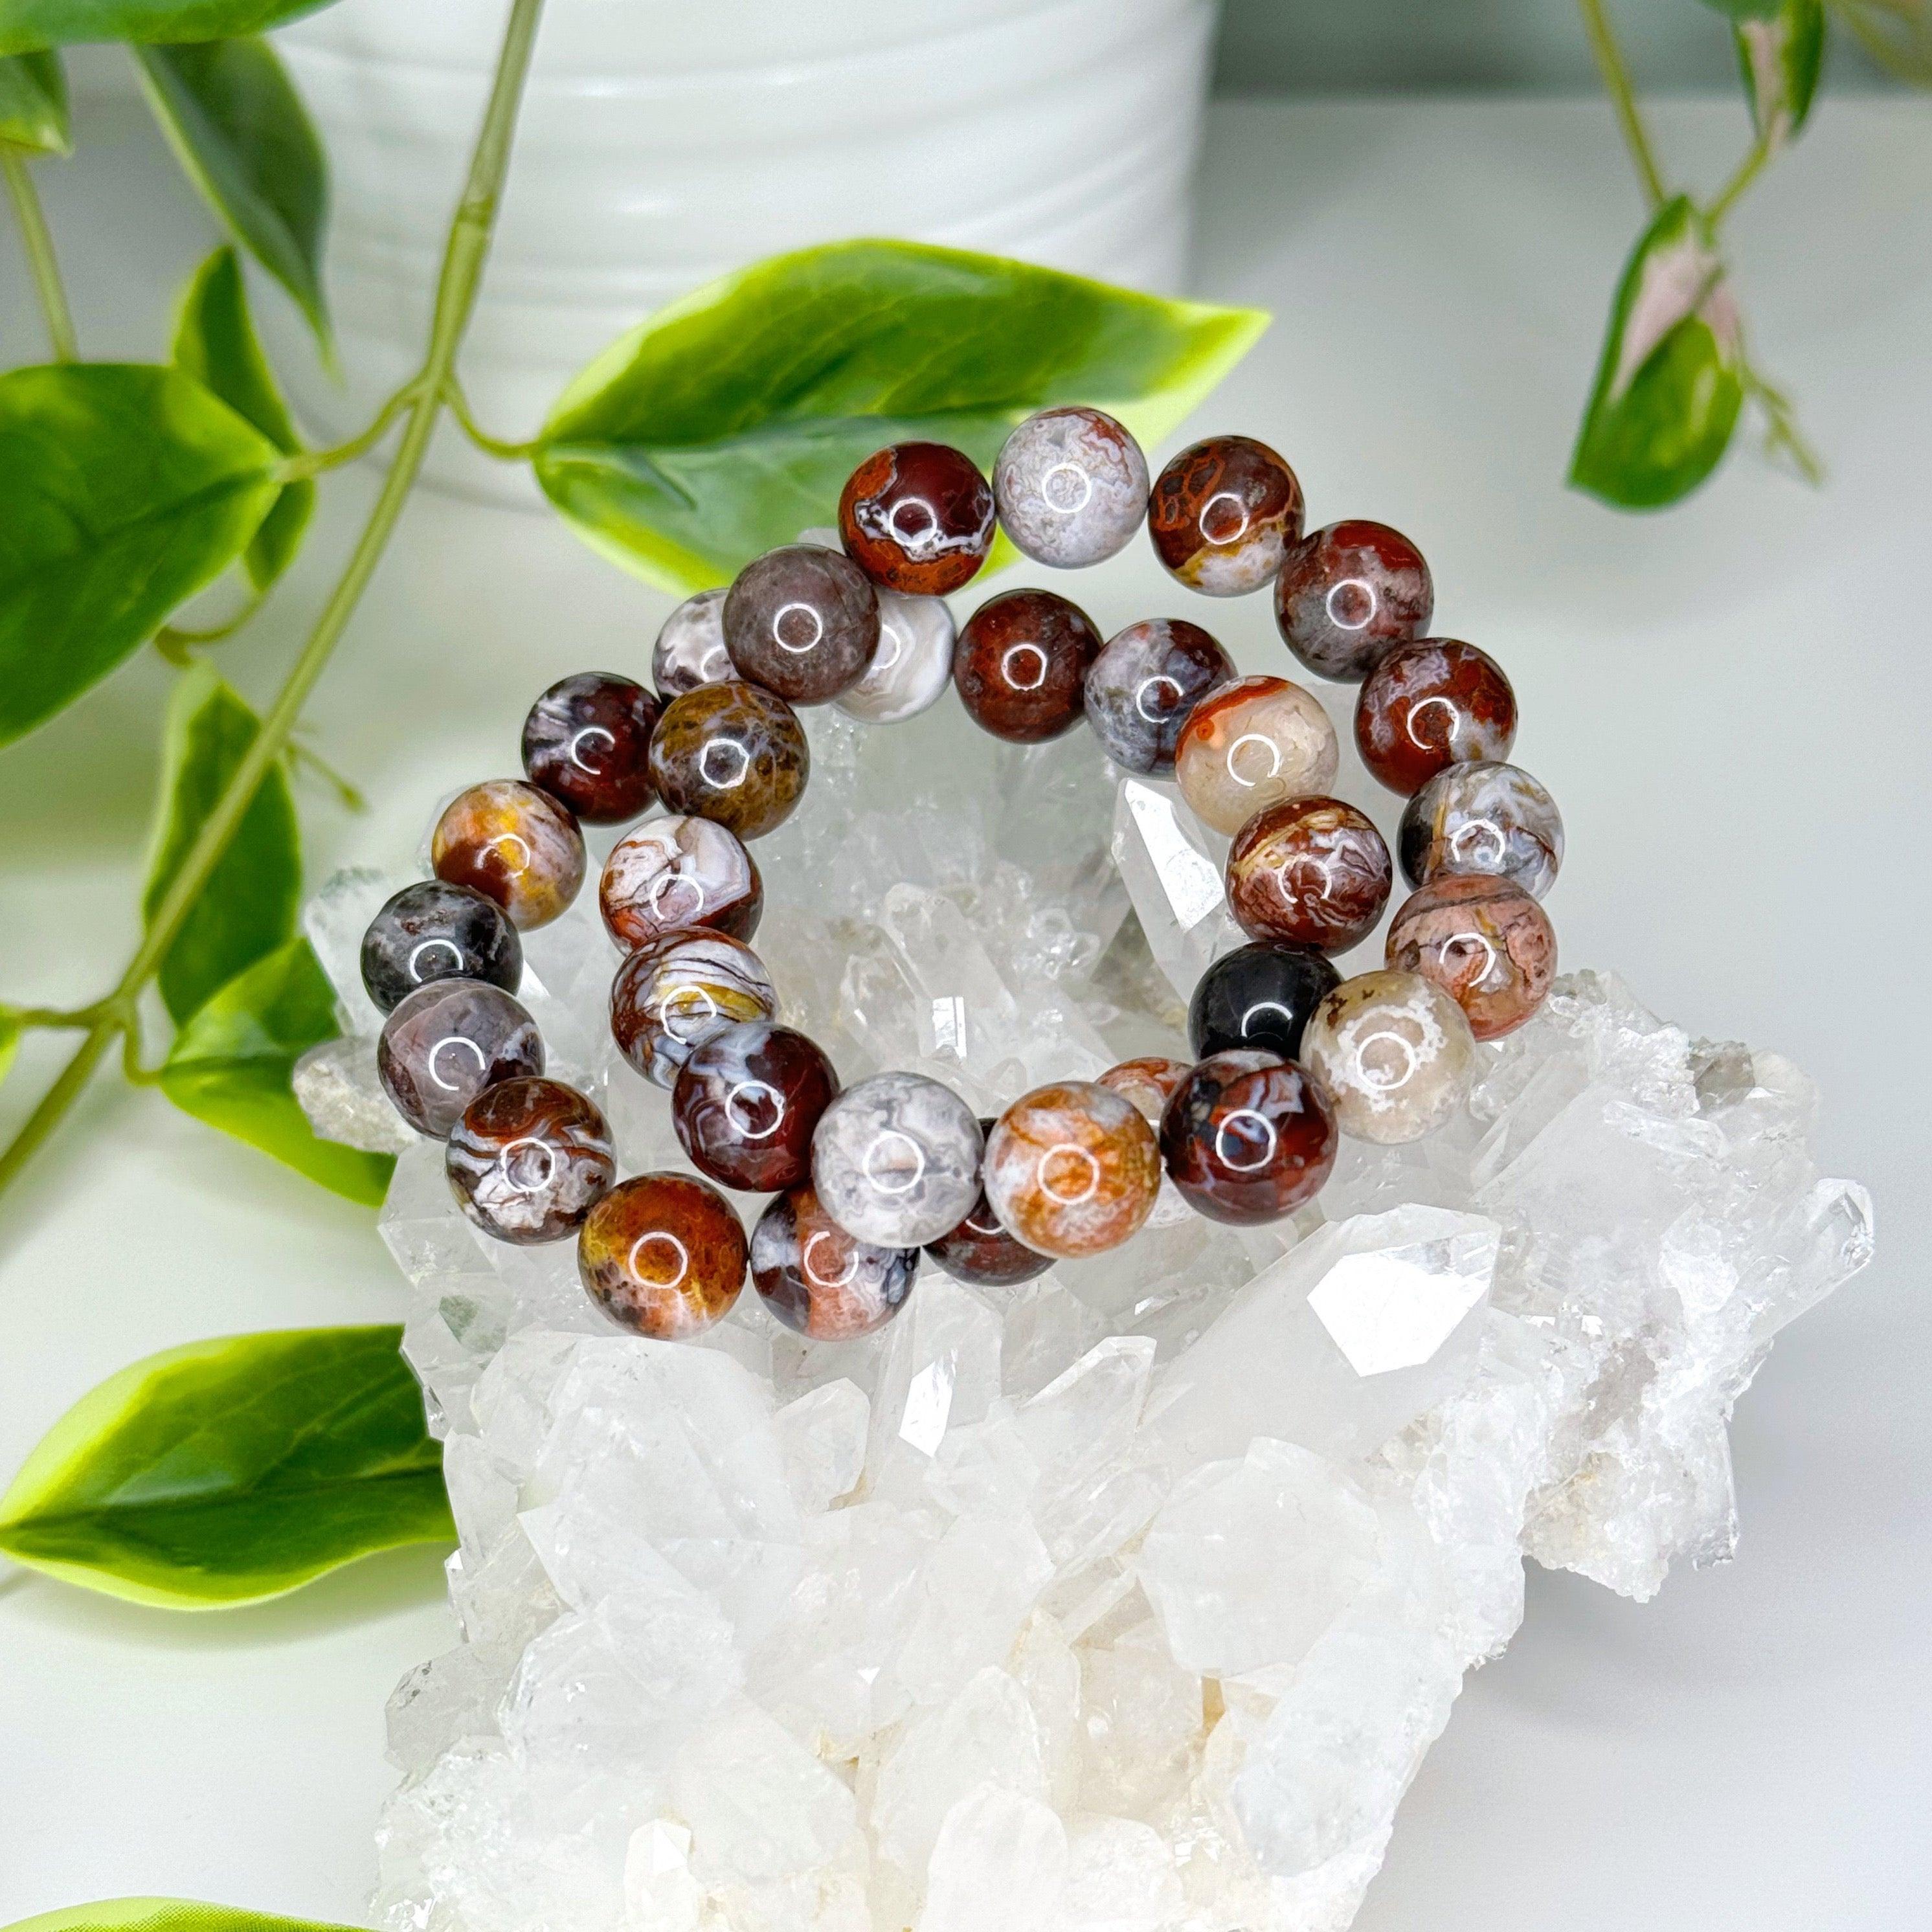 LAGUNA AGATE 12mm - HANDMADE CRYSTAL BRACELET - 12mm, agate, bracelet, brown, crystal bracelet, fire, gemini, gemini stack, grey, handmade bracelet, jewelry, laguna agate, market bracelet, mixed colors, recently added, spring collection, Wearable - The Mineral Maven